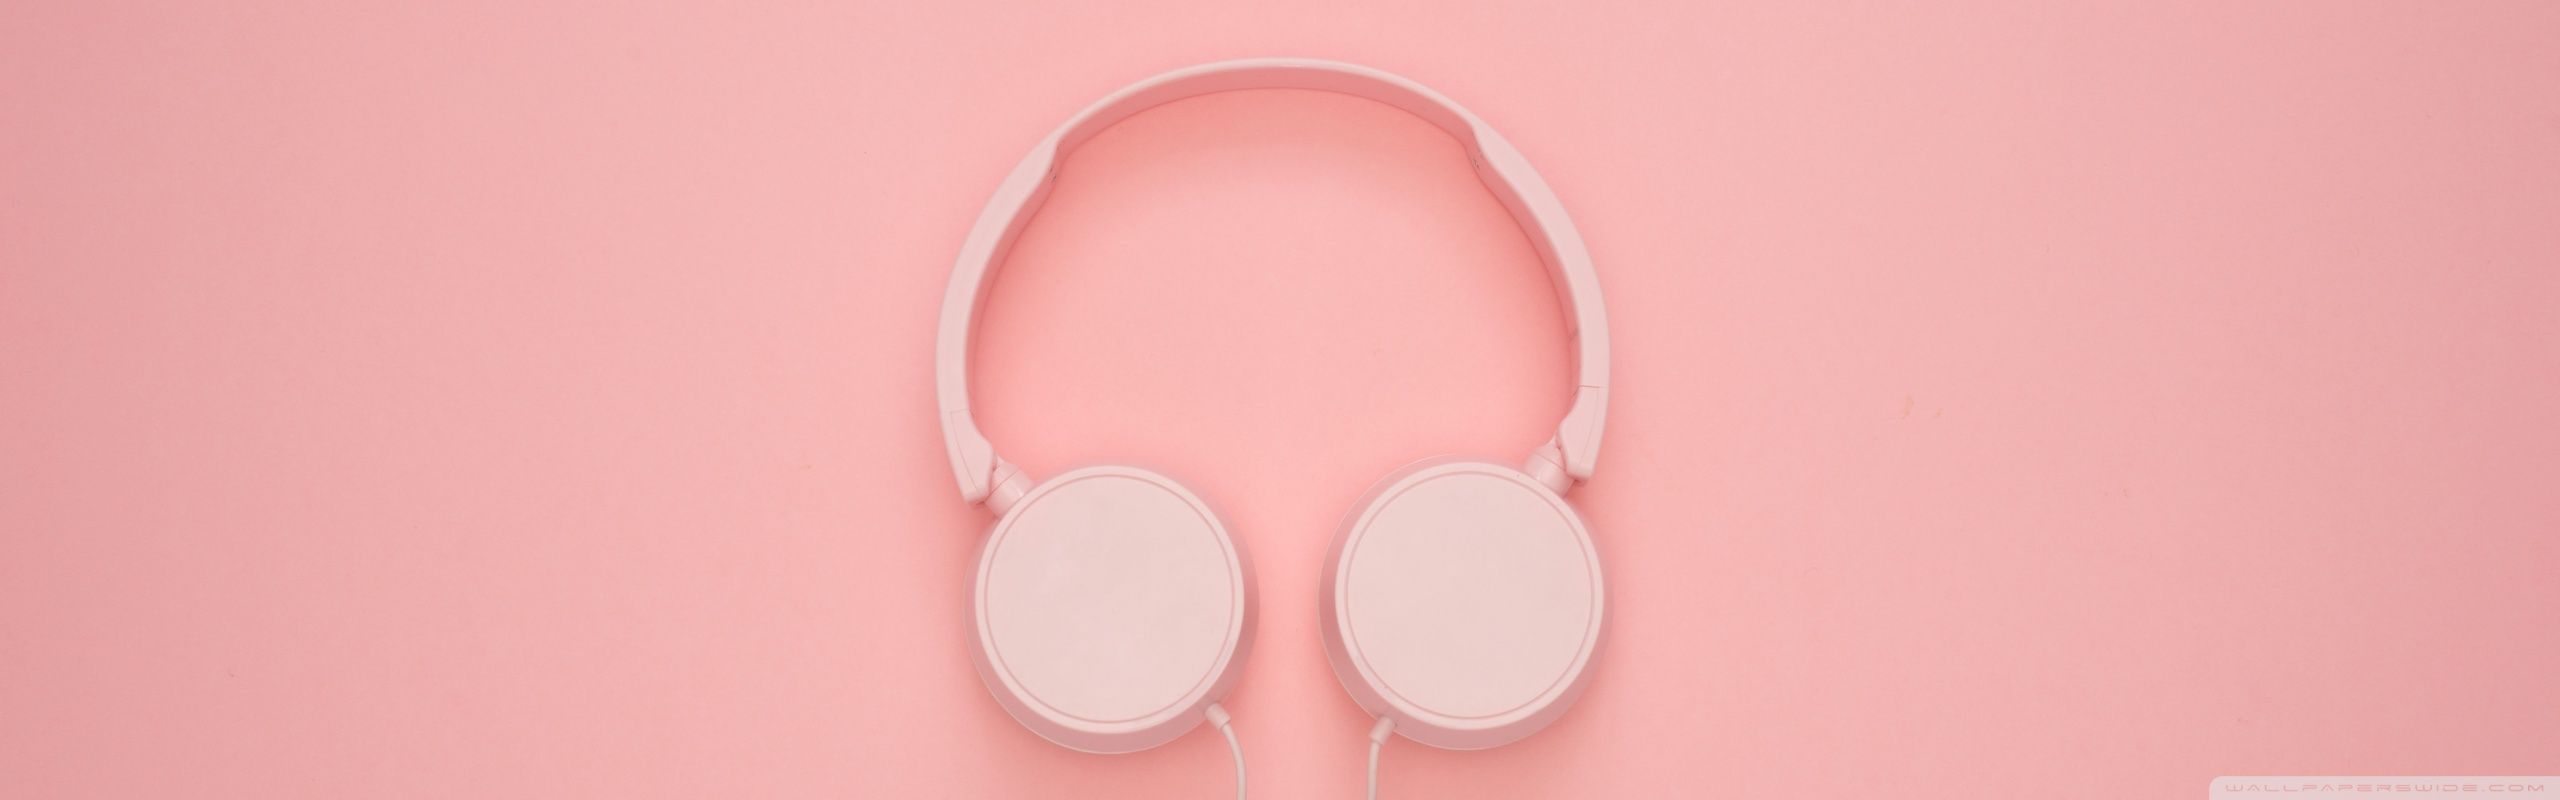 A pair of headphones on pink background - YouTube